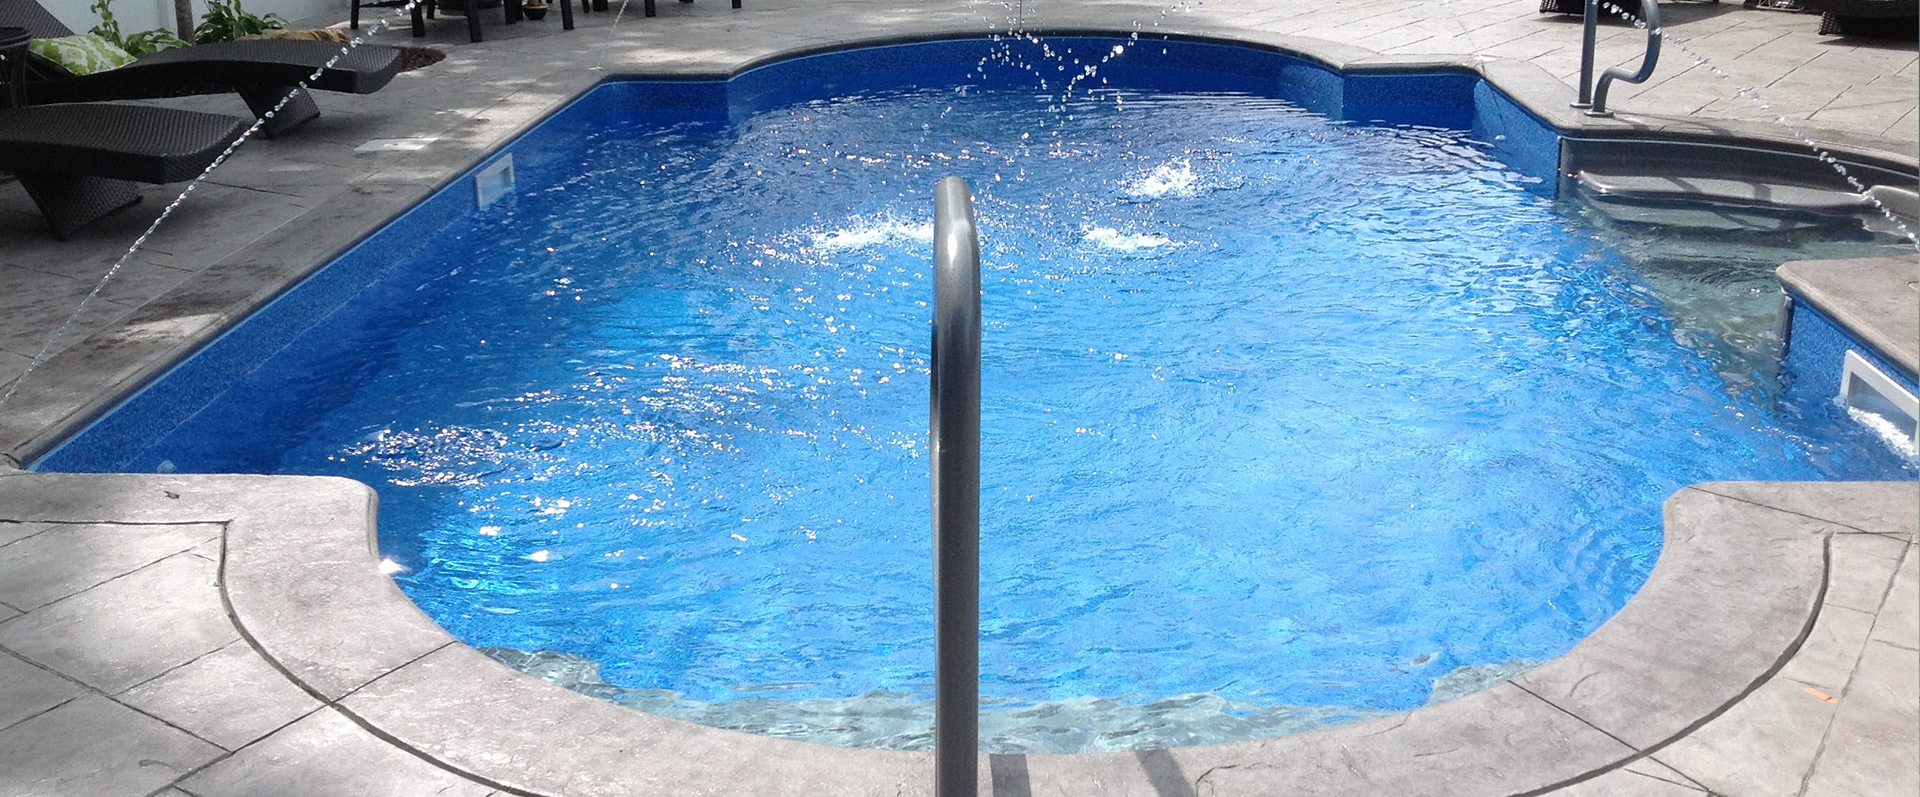 Check Out Our Inground Pool Specials